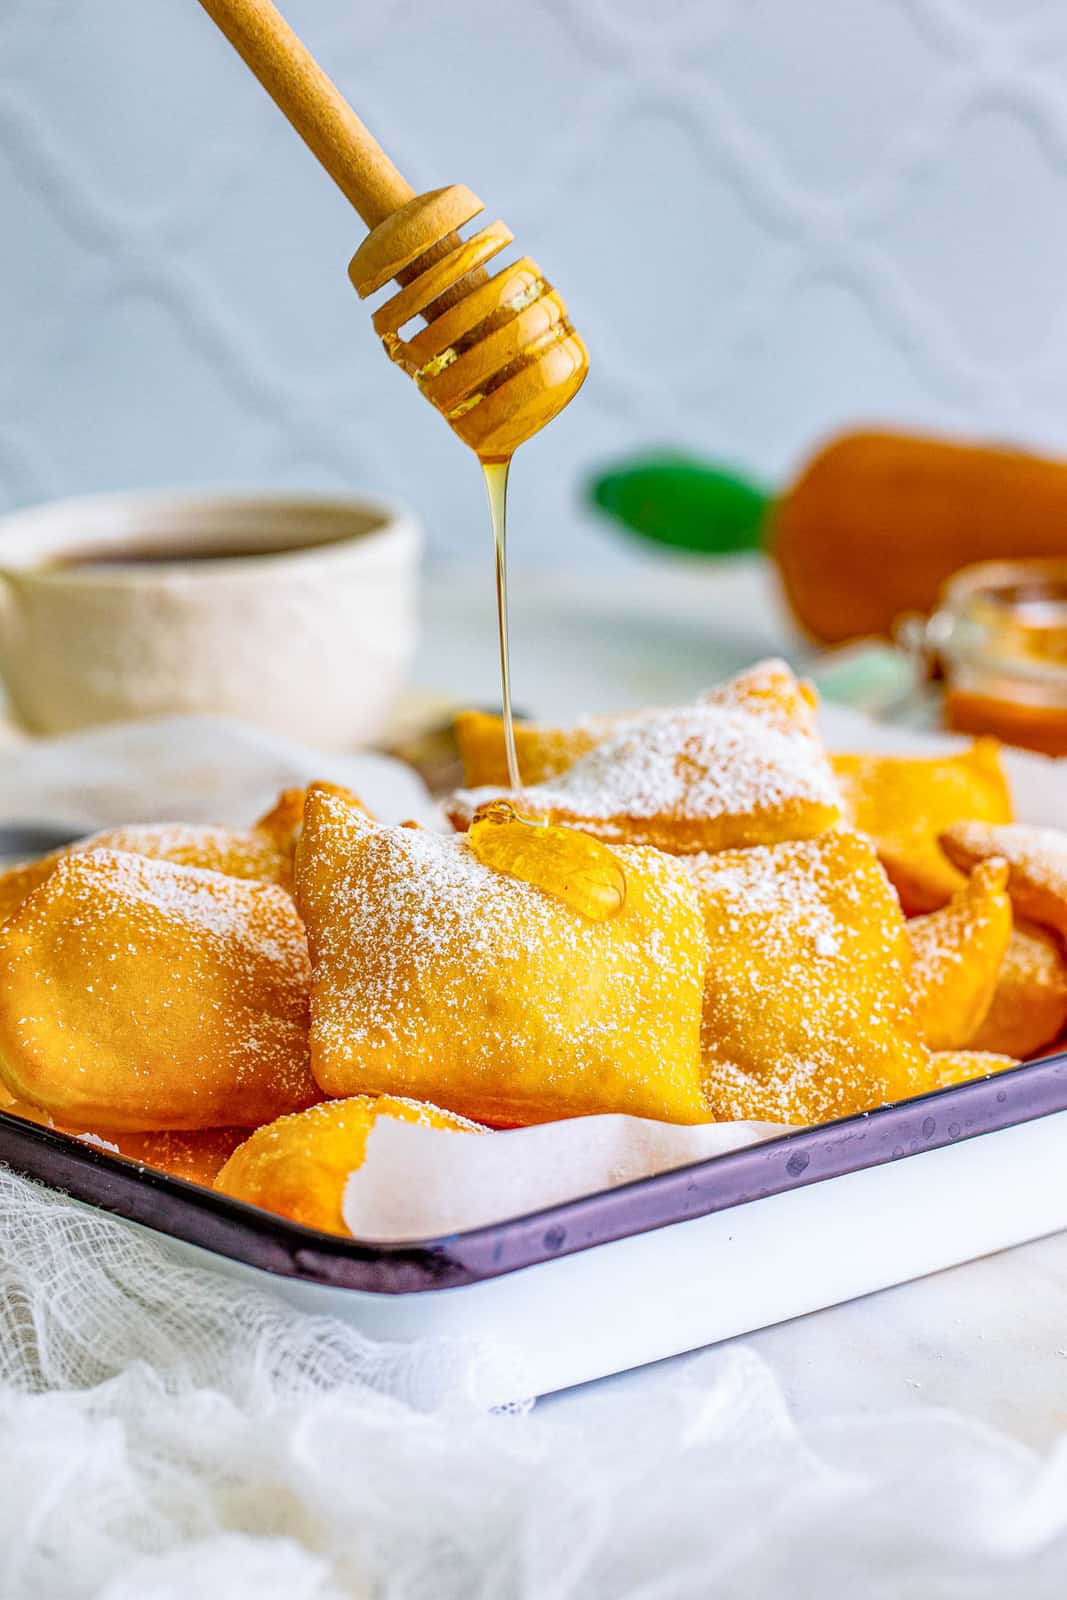 Honey being drizzled over Sopapillas on platter with powdered sugar.